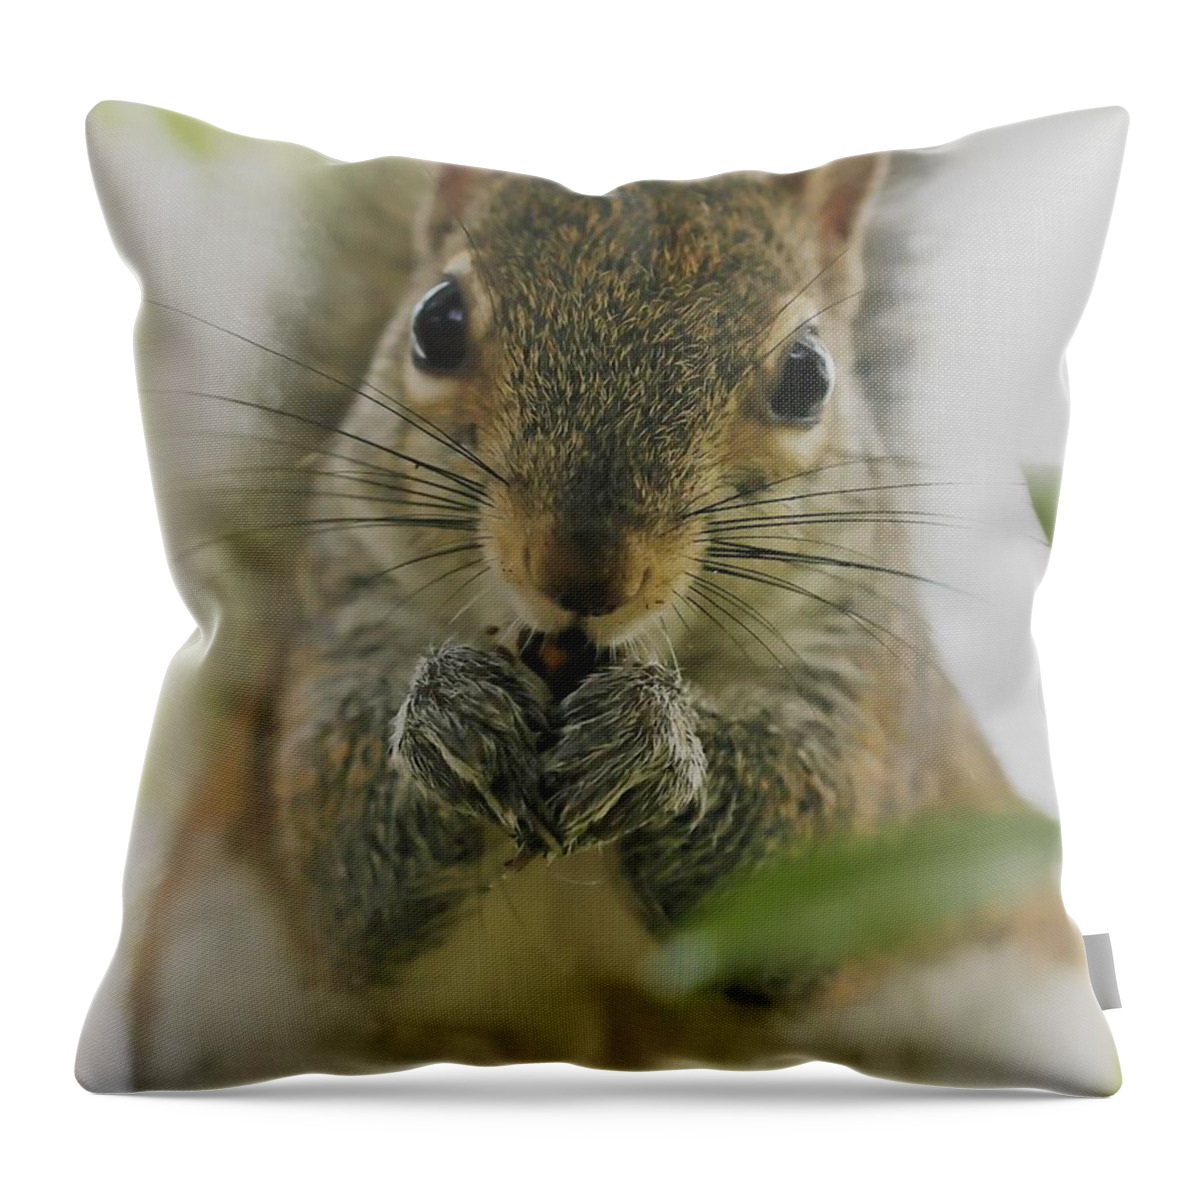 Squirrel Throw Pillow featuring the photograph Portrait of a Squirrel by Mingming Jiang